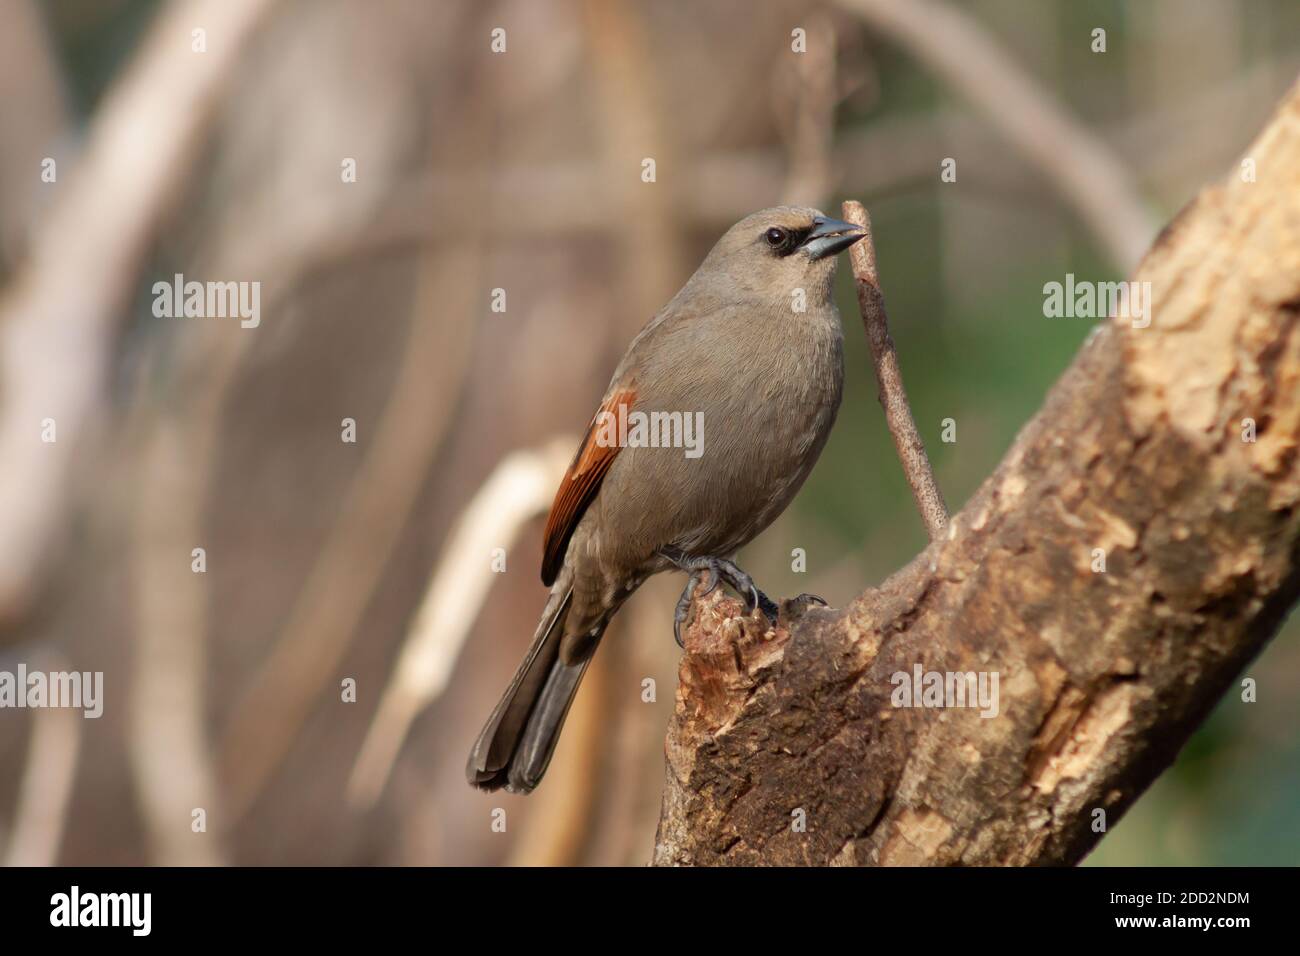 Bay-winged cowbird, Molothrus badius, perched on a branch. Typical bird of Argentina Stock Photo